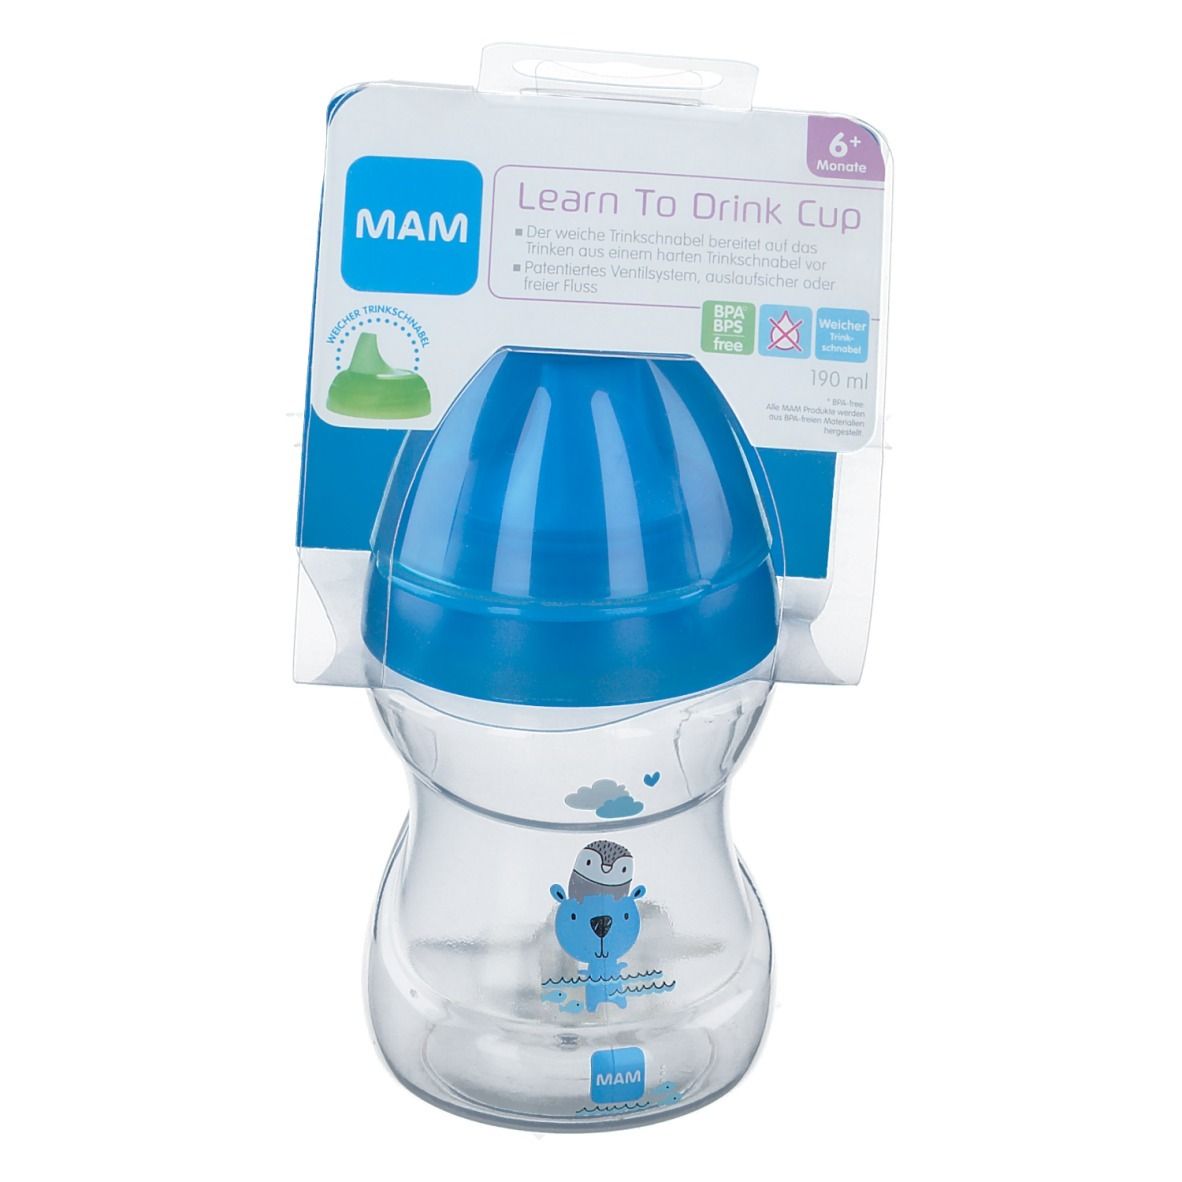 MAM Learn to Drink Cup Fashion 190ml